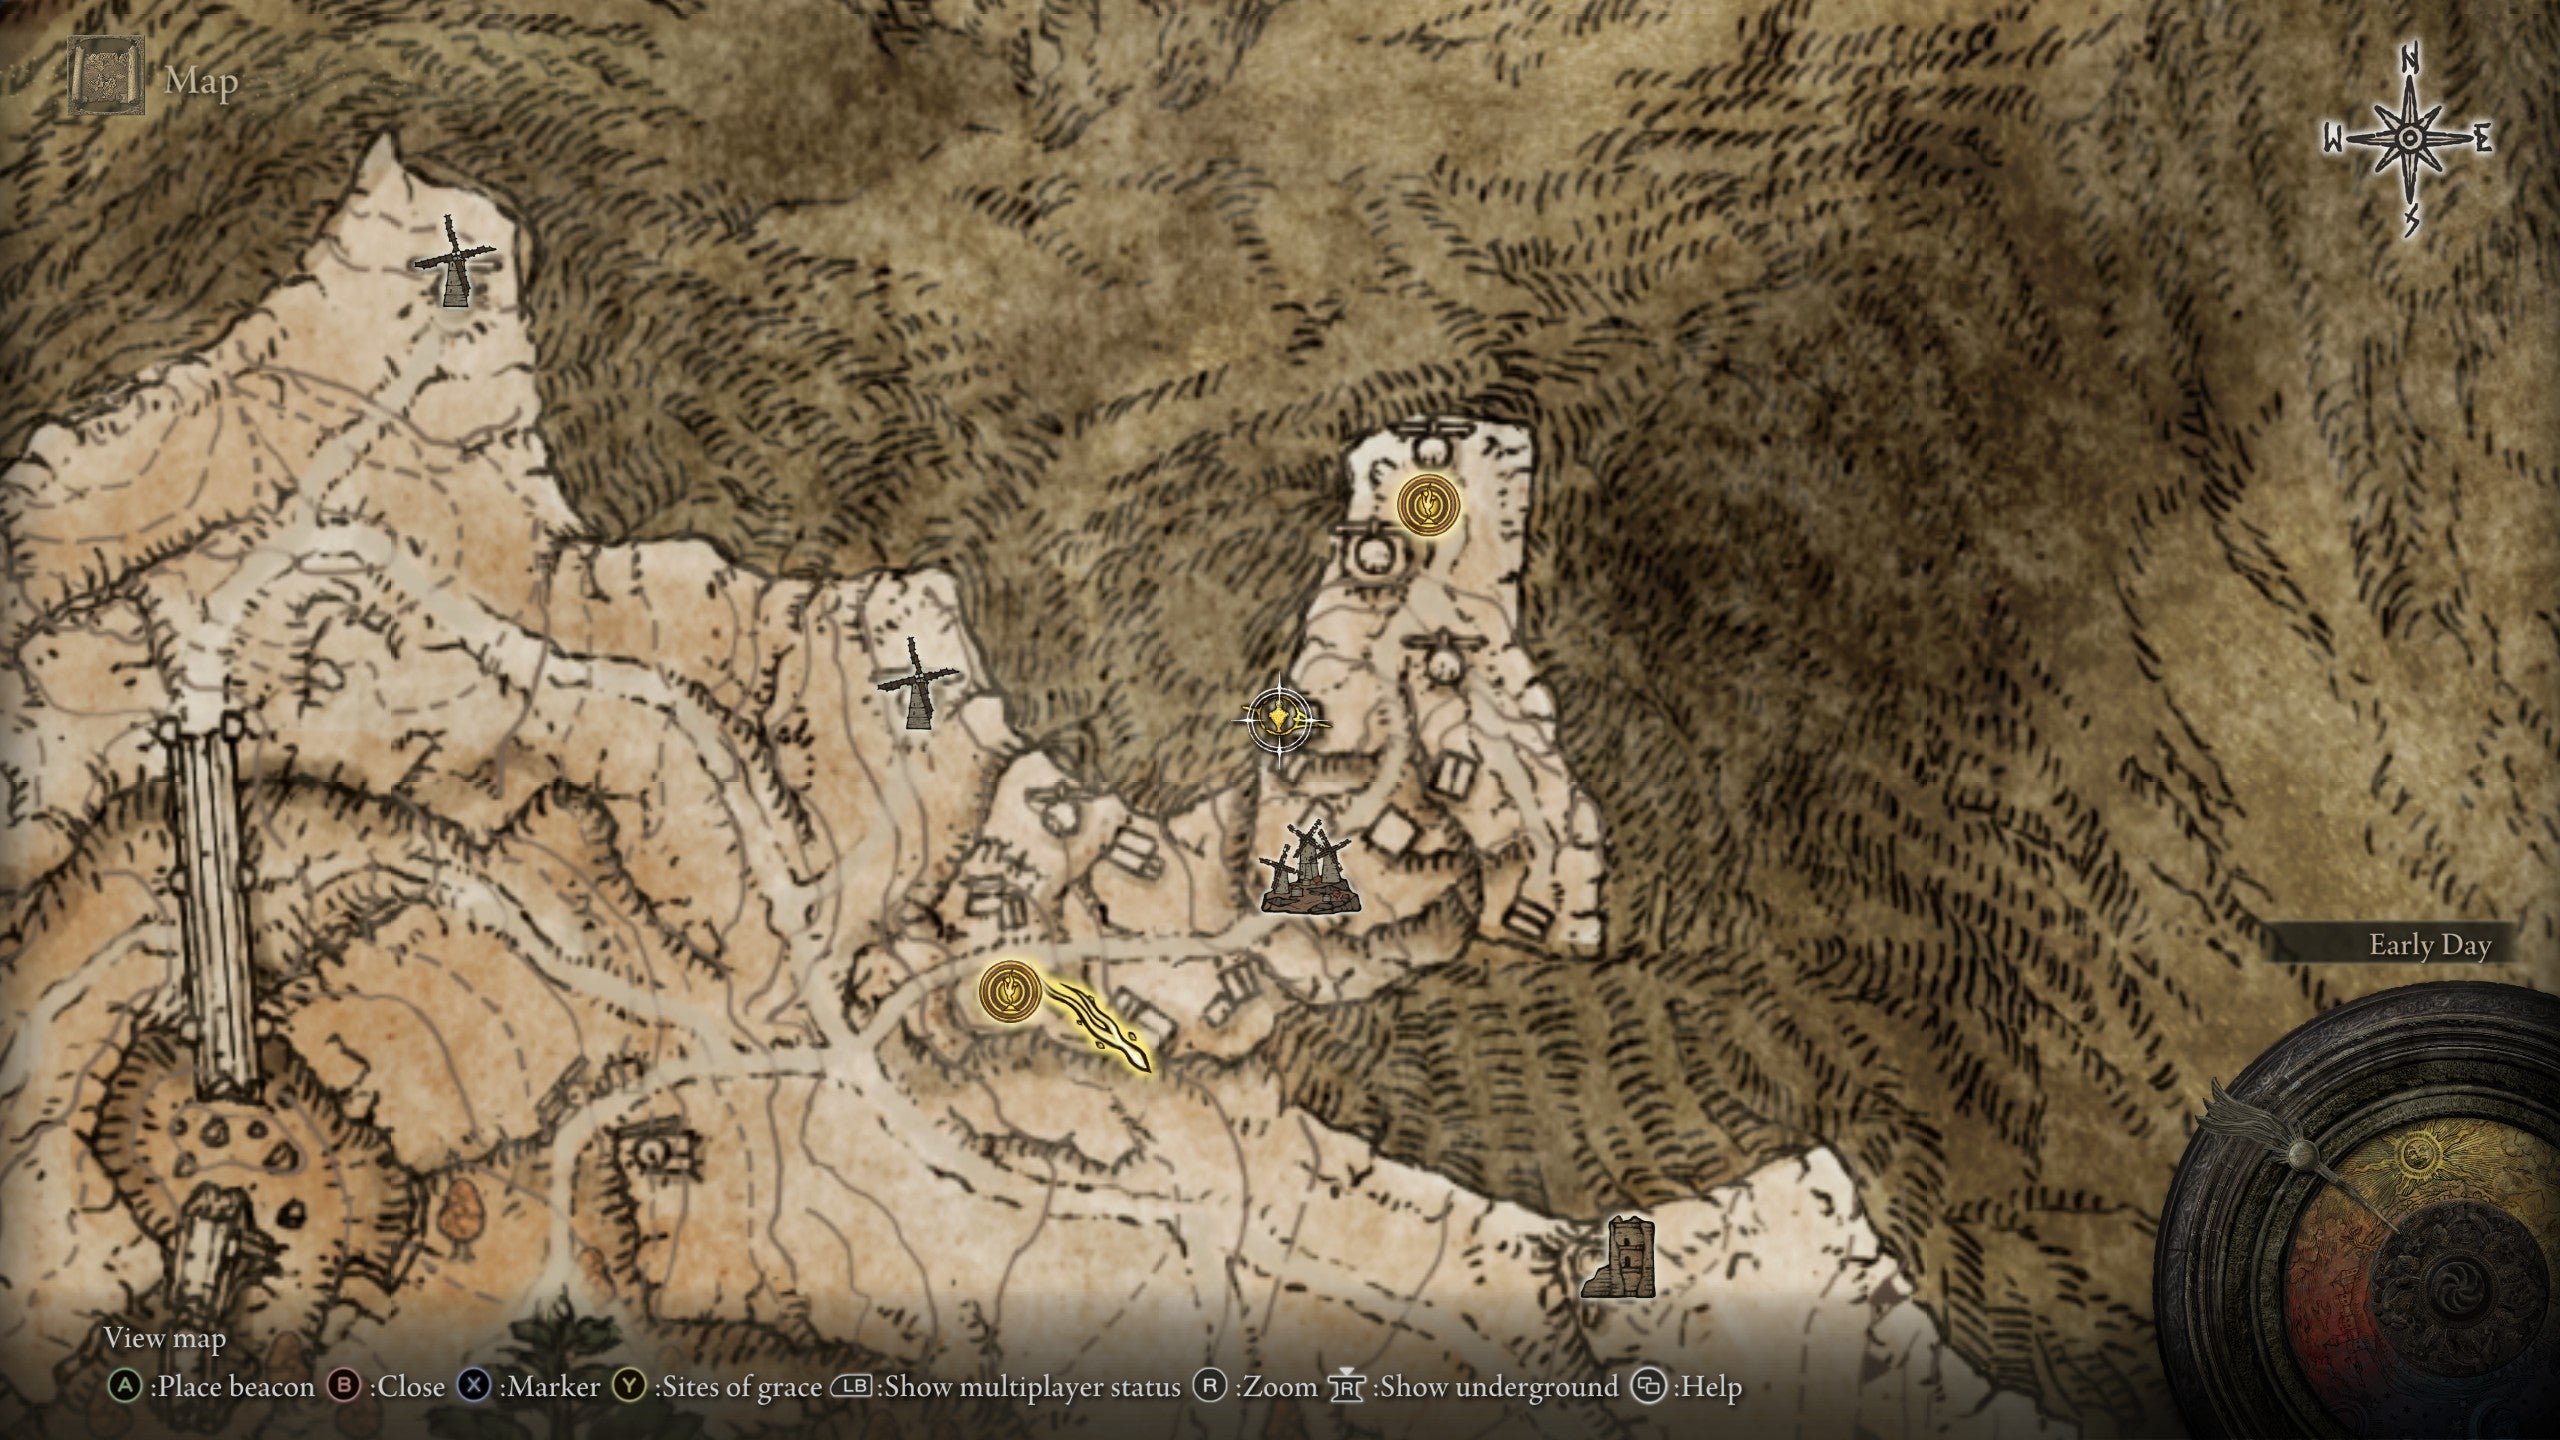 The location of the Celebrant's Skull weapon on the map in Dominula, Village, on the northern edge of Elden Ring's Altus Plateau